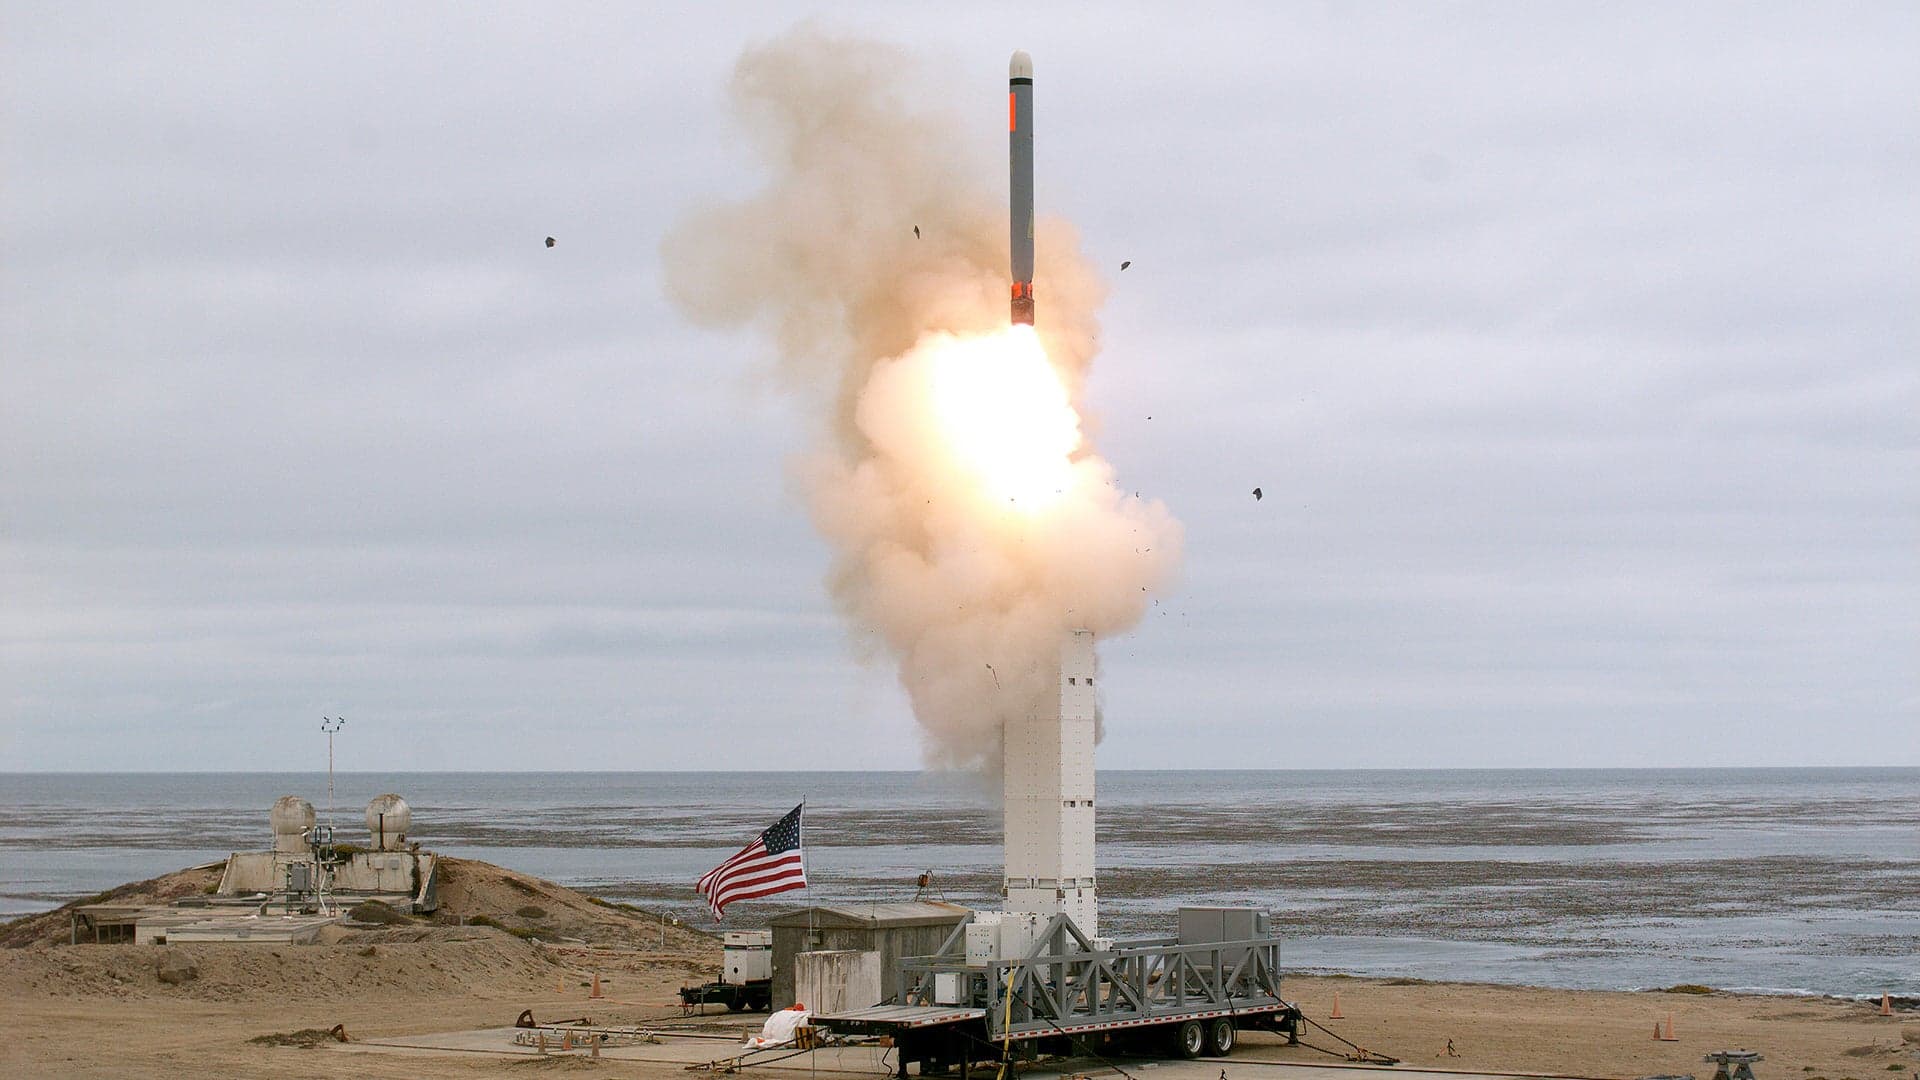 Let’s Talk About The Post-INF Treaty U.S. Test Of A Ground-Launched Tomahawk Missile